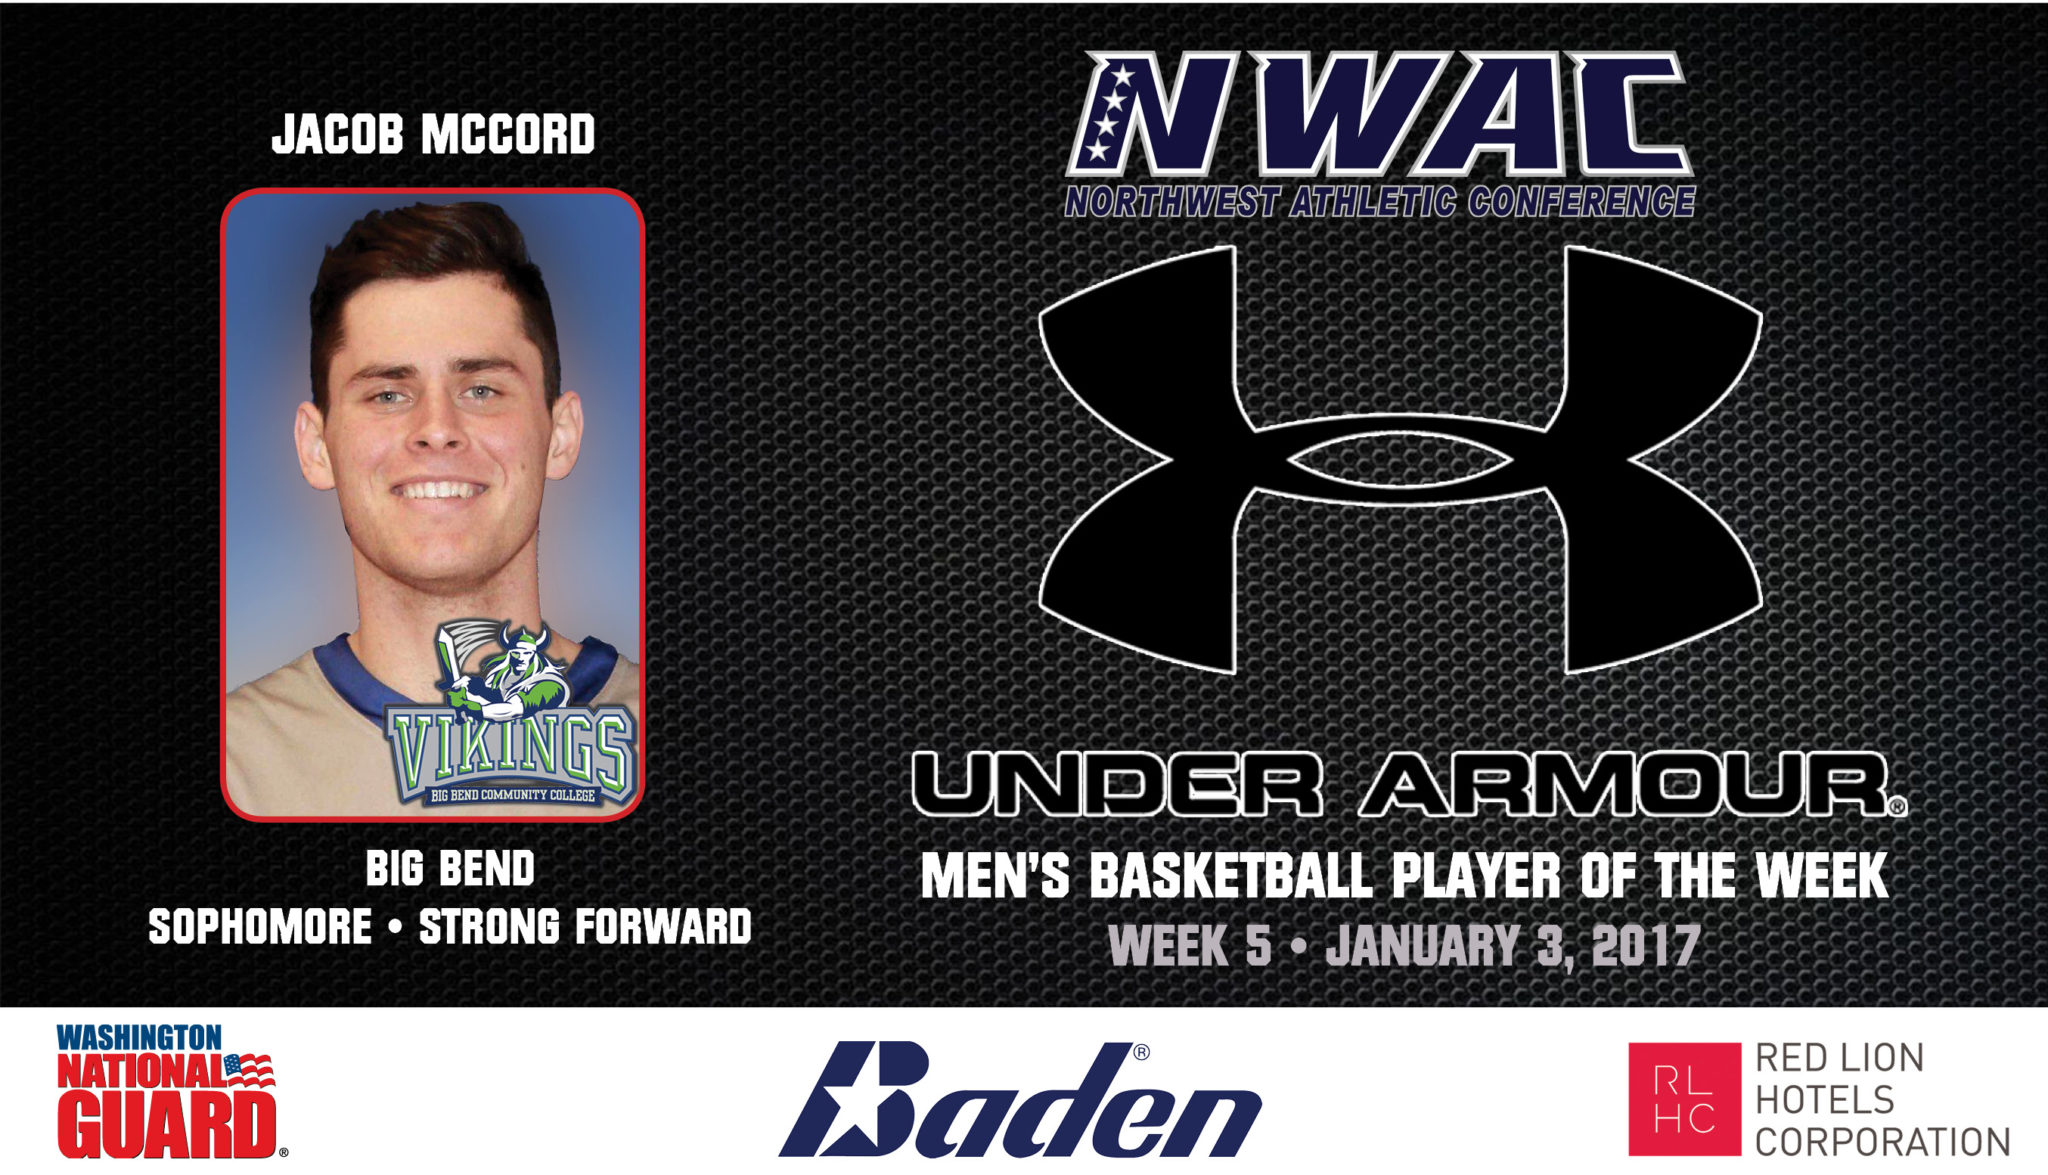 Under Armour men's basketball player of the week, Jacob McCord